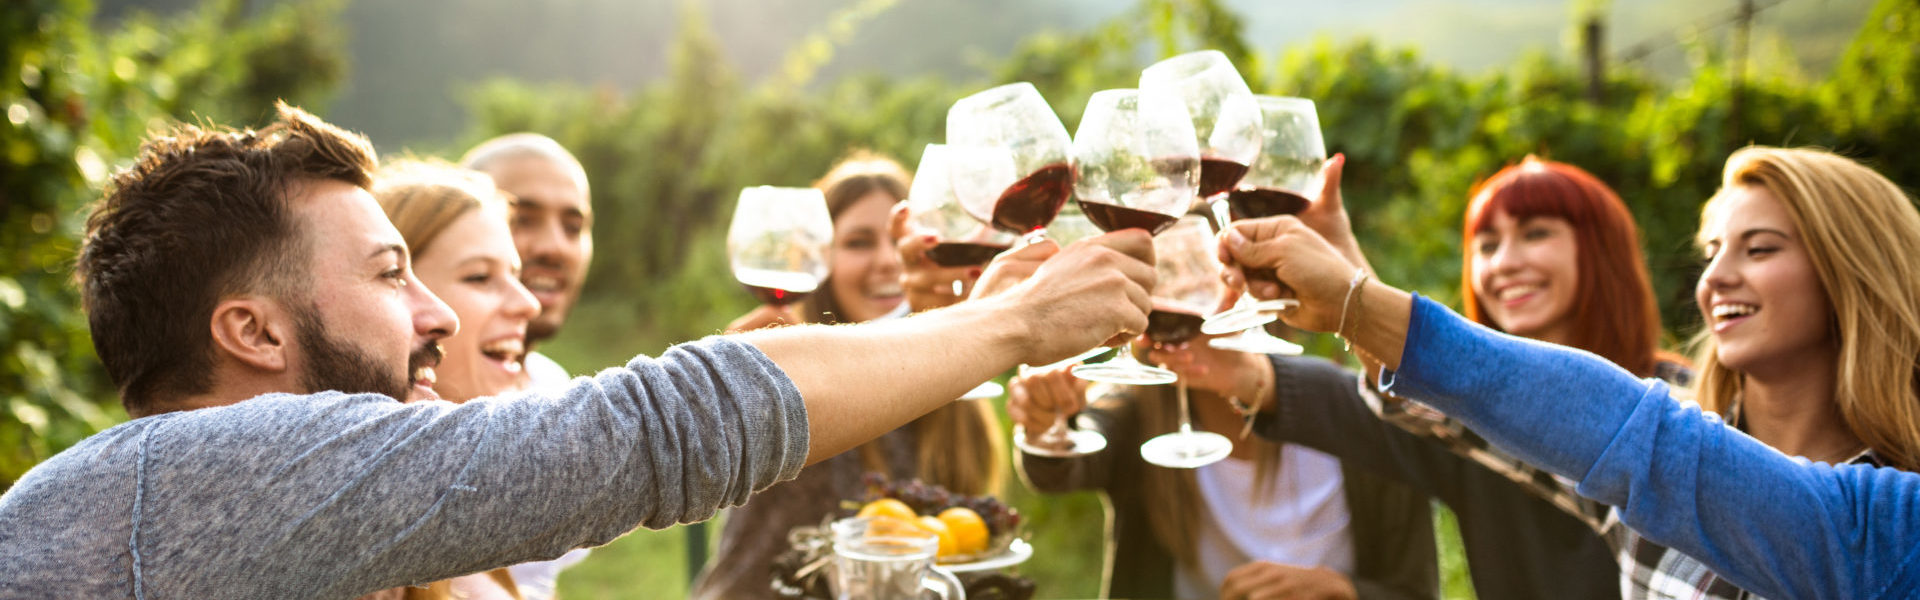 Personal umbrella insurance, group of friends toasting red wine over table outdoors in vineyard with grapevines and mountains as backdrop.